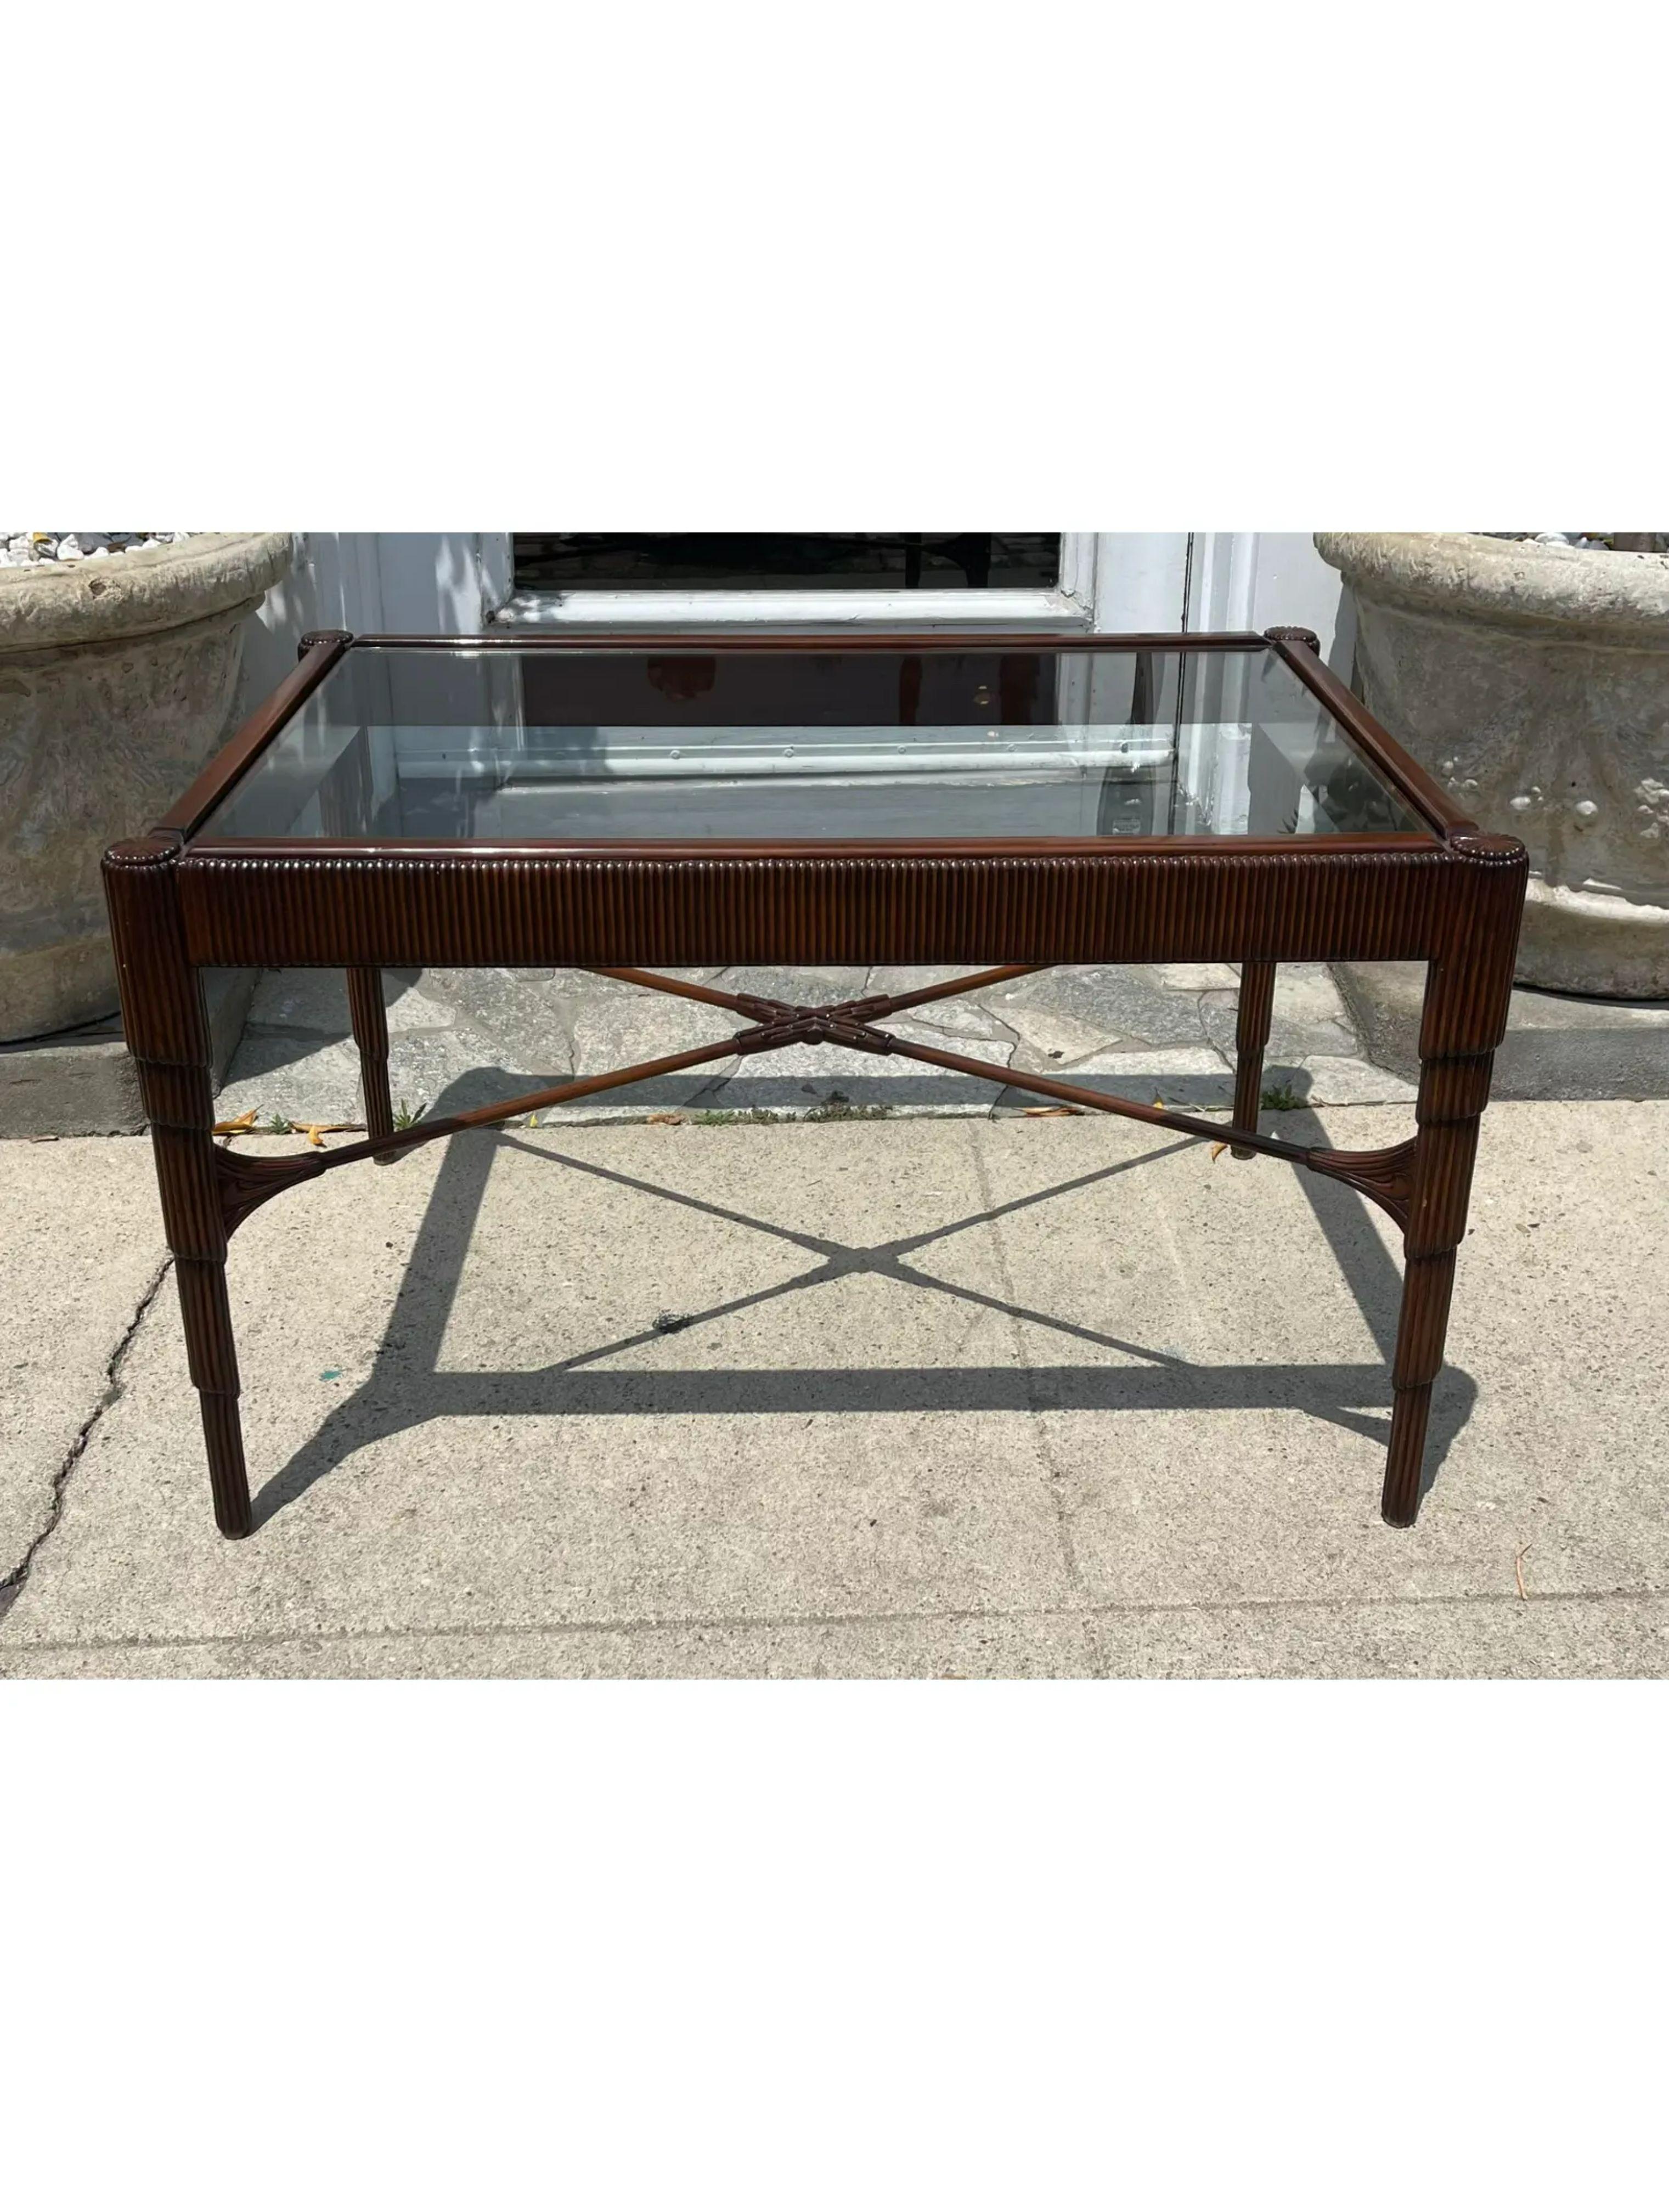 Art Deco Style Nancy Corzine Mahogany Curtain Cocktail Coffee Table

Additional information: 
Materials: Glass, Mahogany
Please note that this item contains materials that are legally subject to a special export process that may extend the